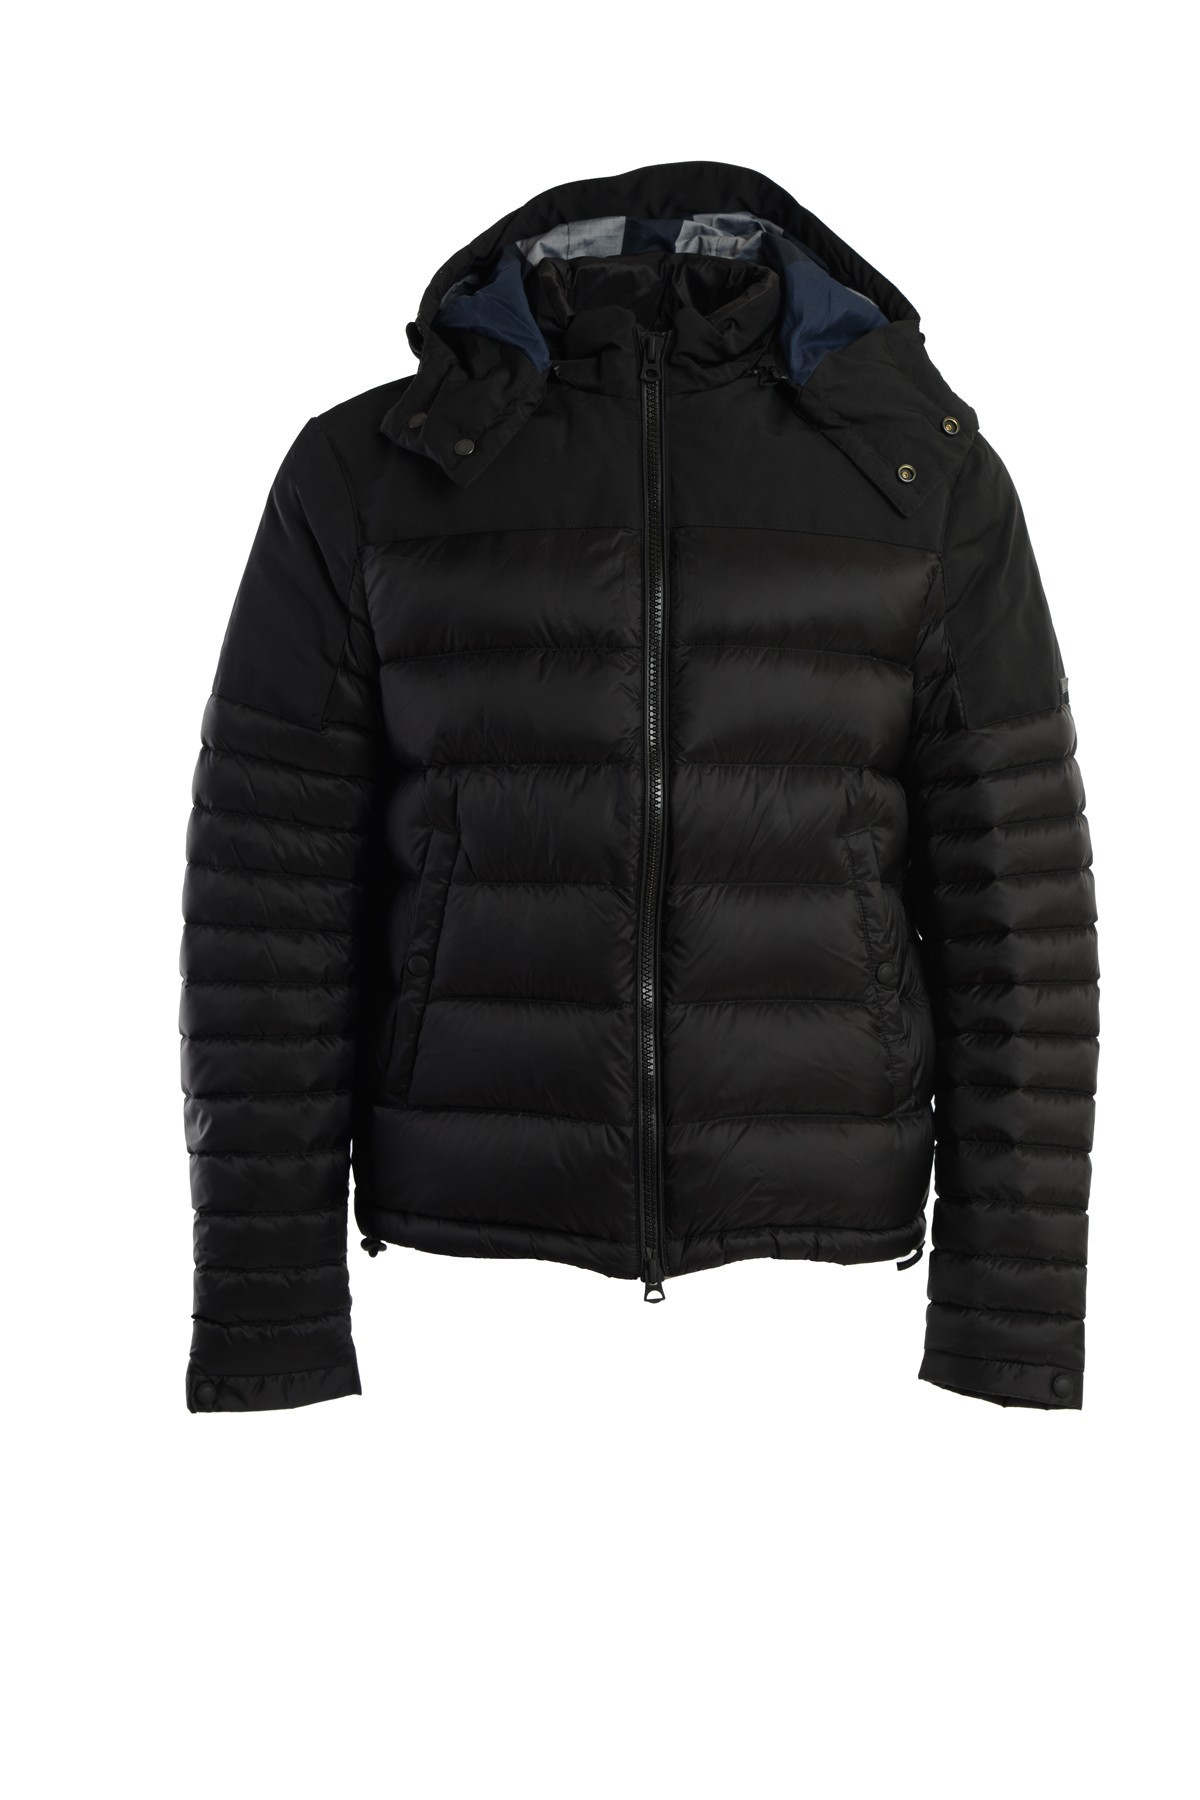 Burberry Down Filled Technical Puffer Jacket in Black for Men | Lyst